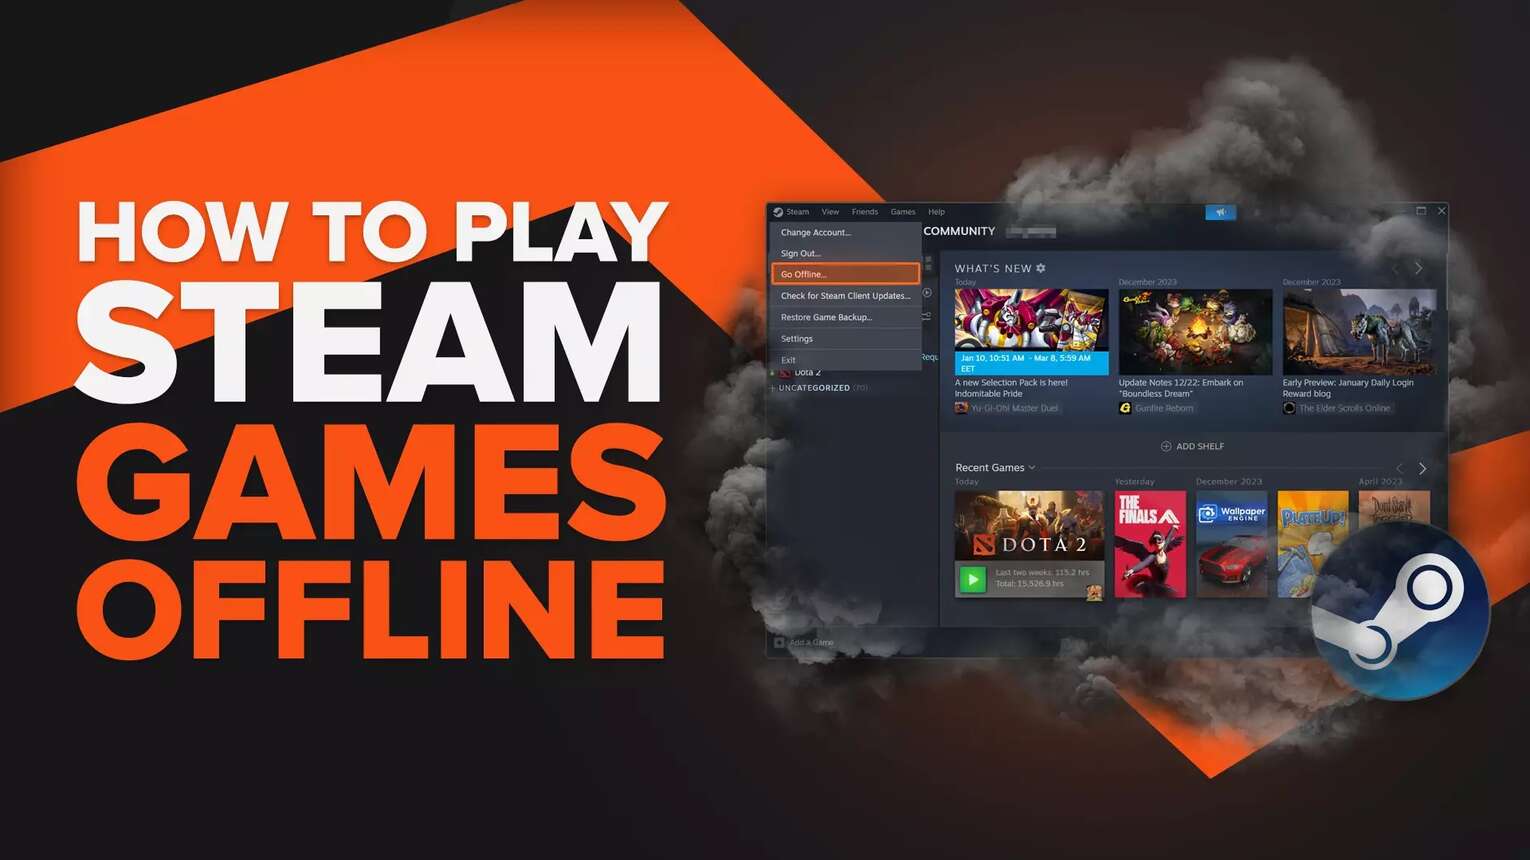 How to Play Steam Games Offline Without WiFi or Internet